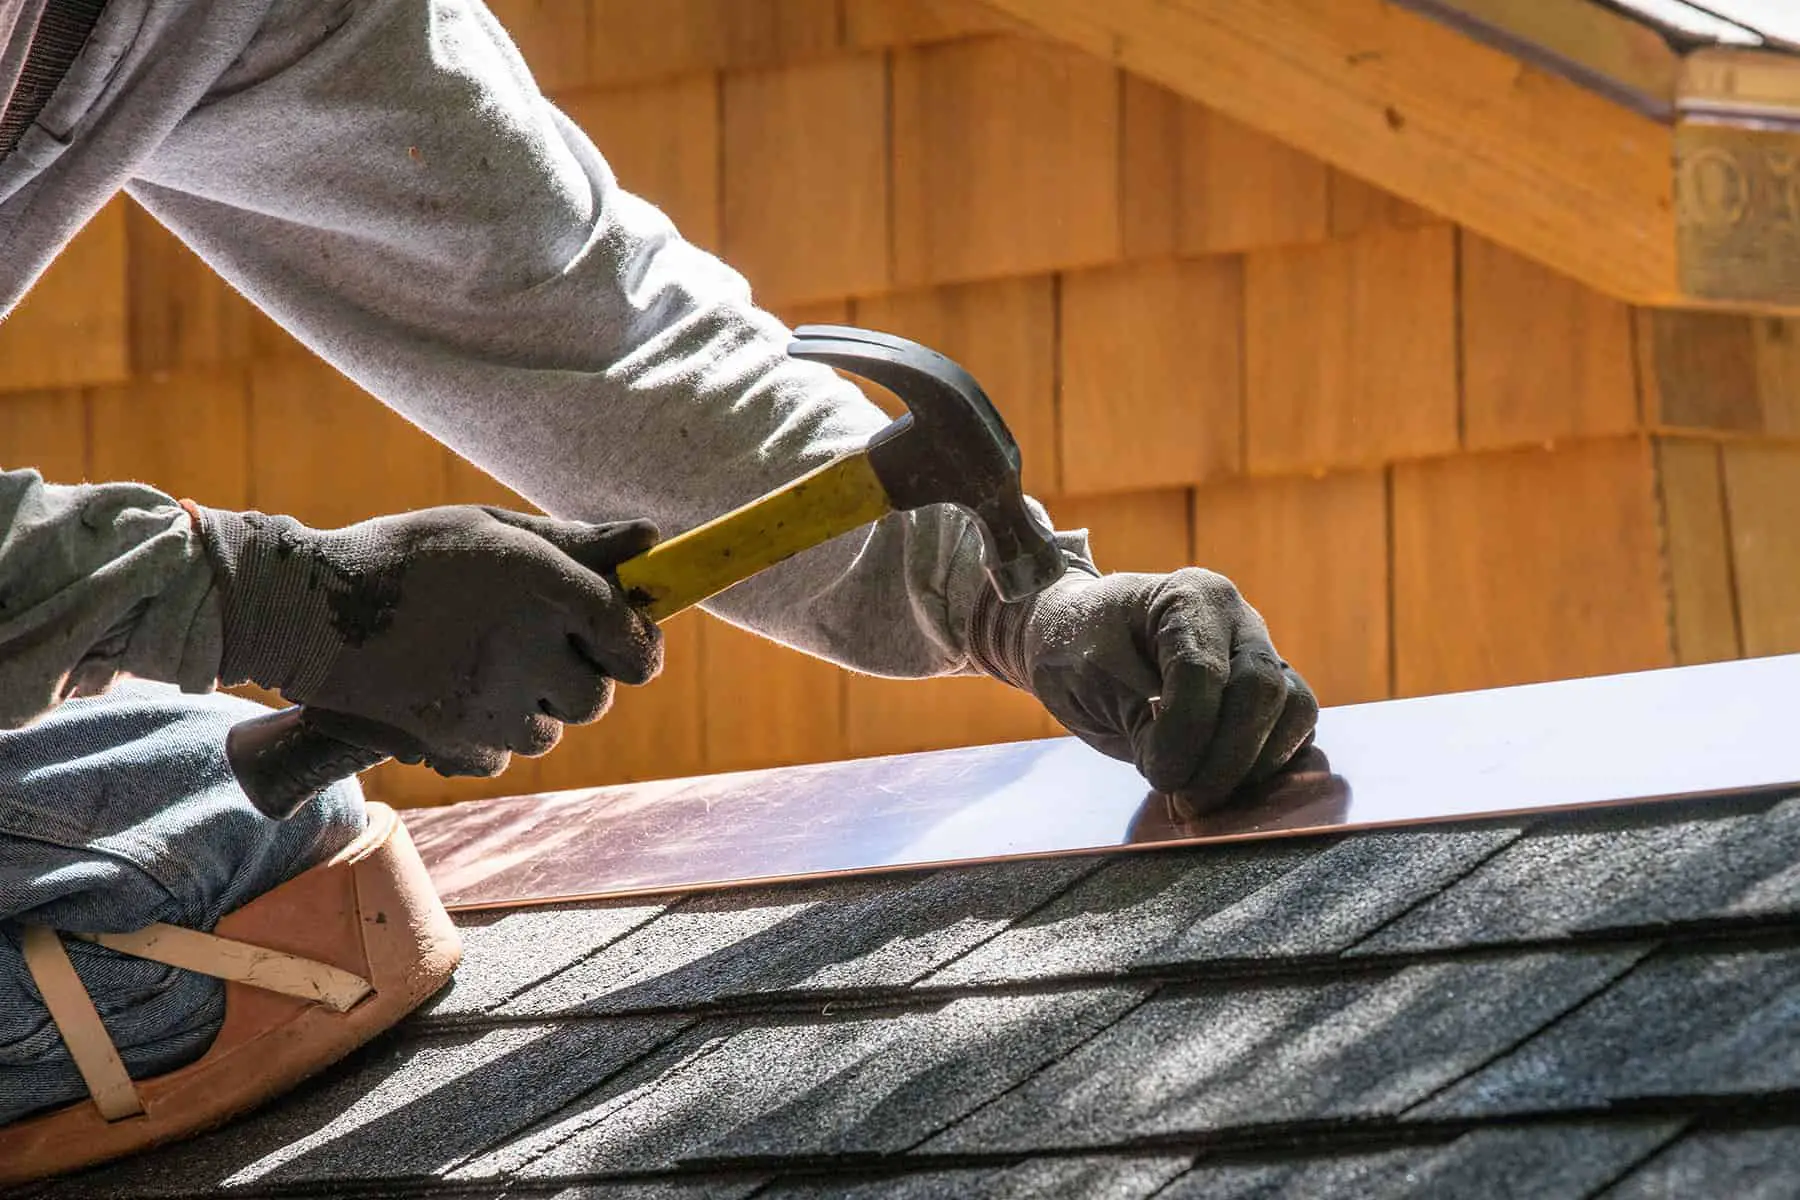 Roofers in My Area: How To Find a Roofer Best For You (2020)